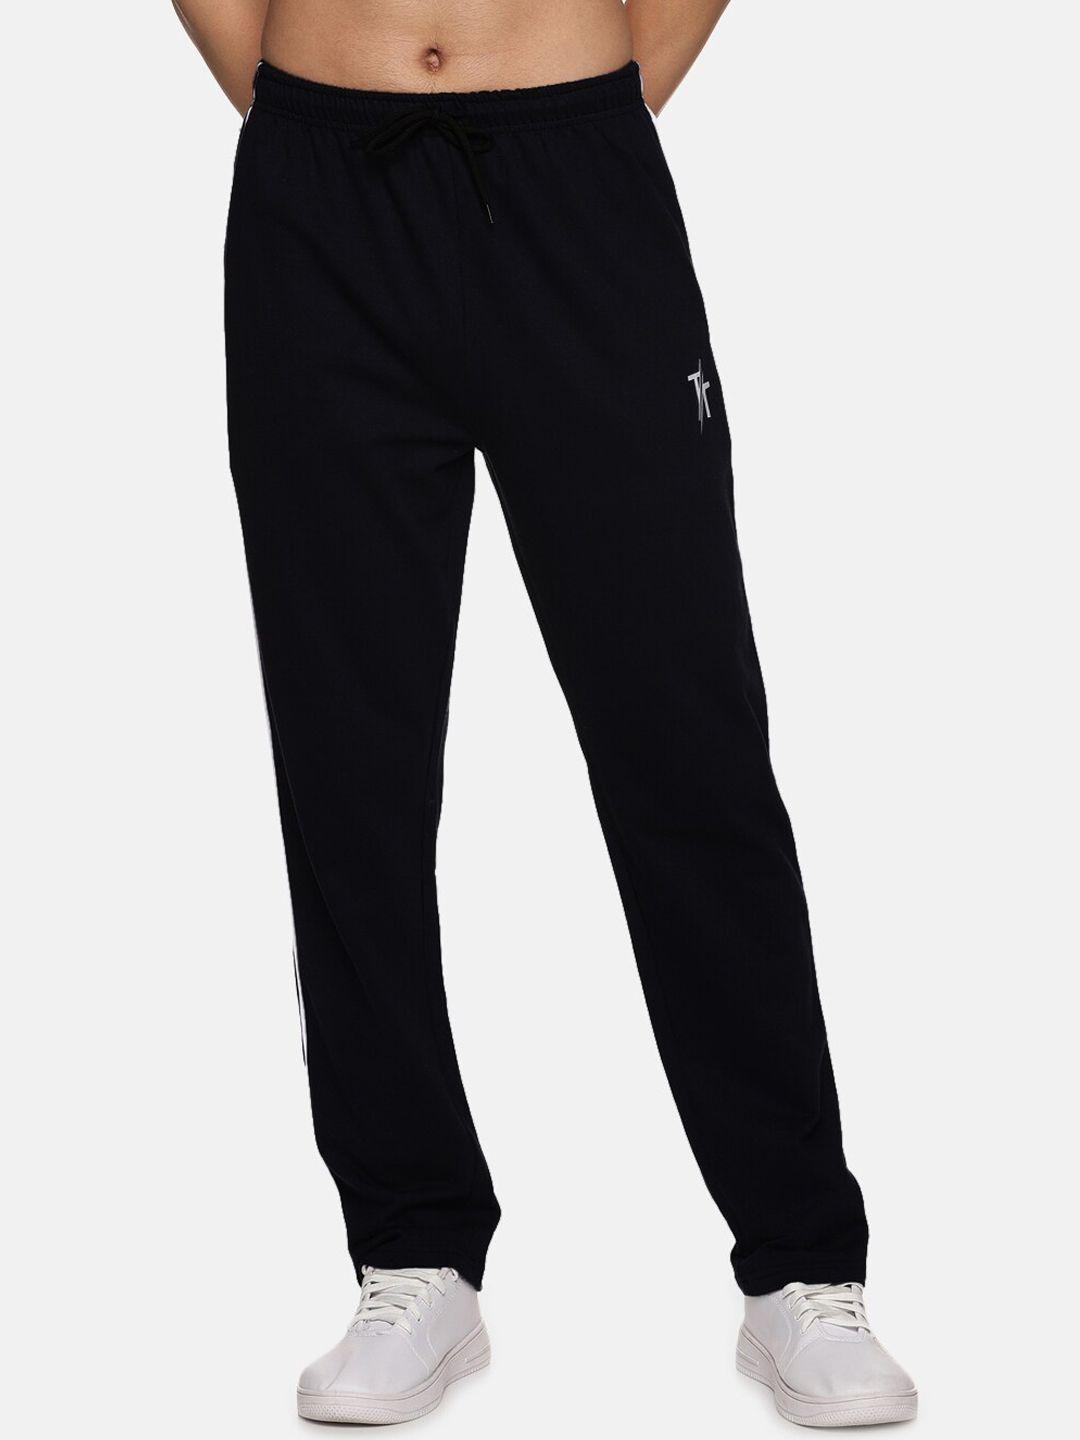 trends tower men cotton dry fit track pants